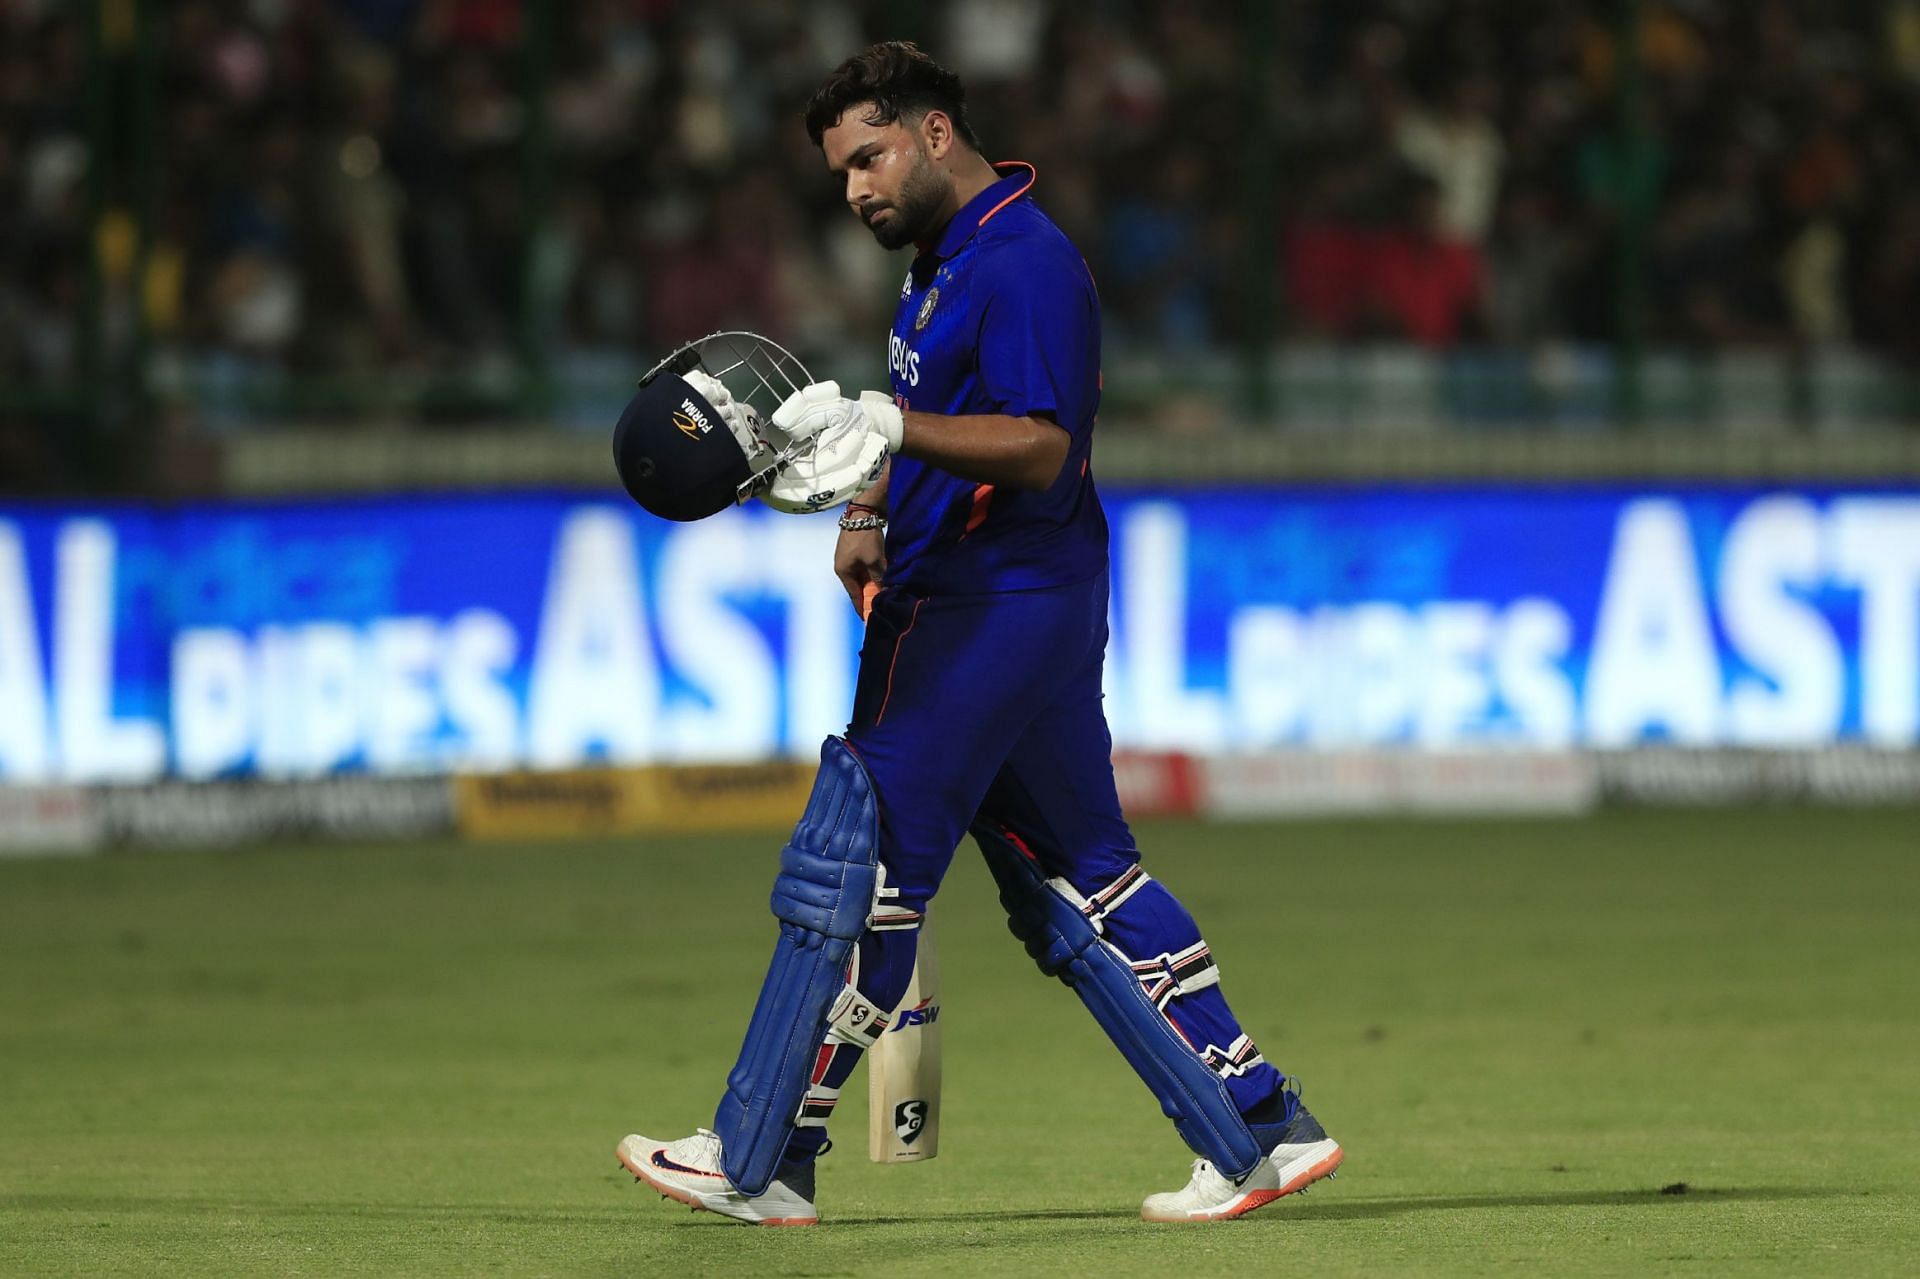 Rishabh Pant will have to be at the top of his game in the T20I series against England